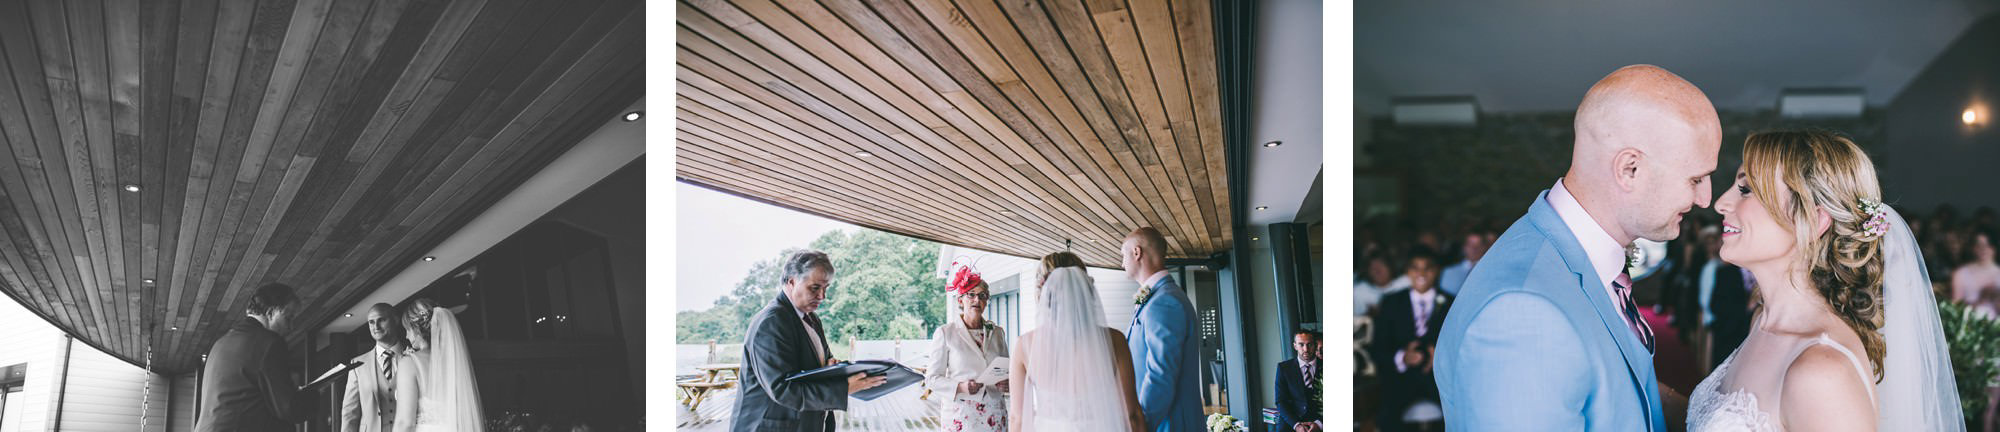 boathouse-wedding-ormesby-broad-by-james-powell-photography-016